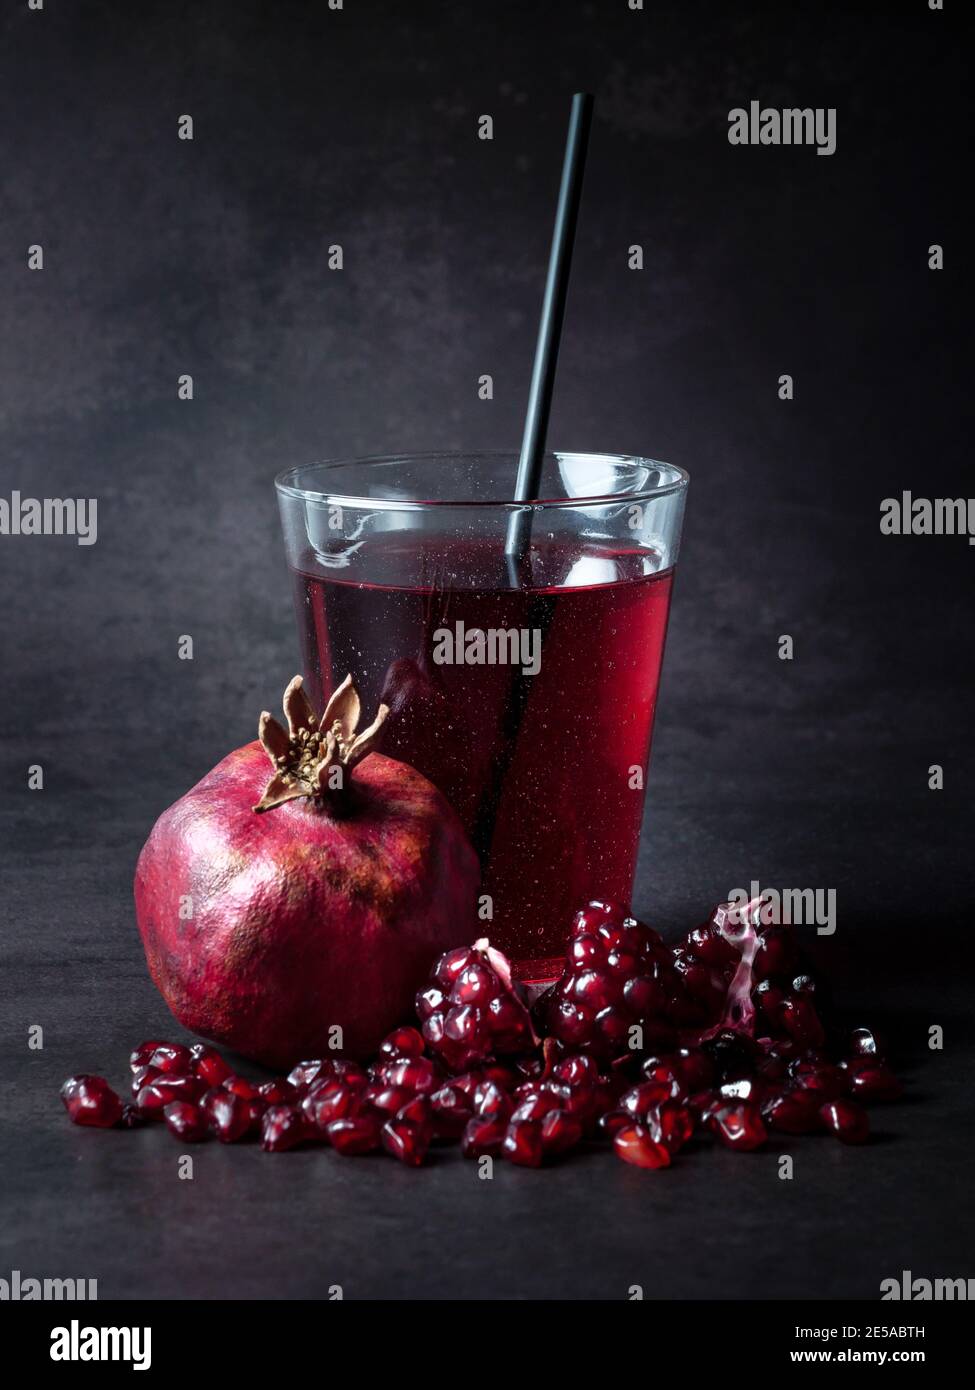 Pomegranate juice in a glass with cocktaile straw and fresh grenadine fruit on the table at black background. Popular fruit in Azerbaijan and Turkey. Stock Photo